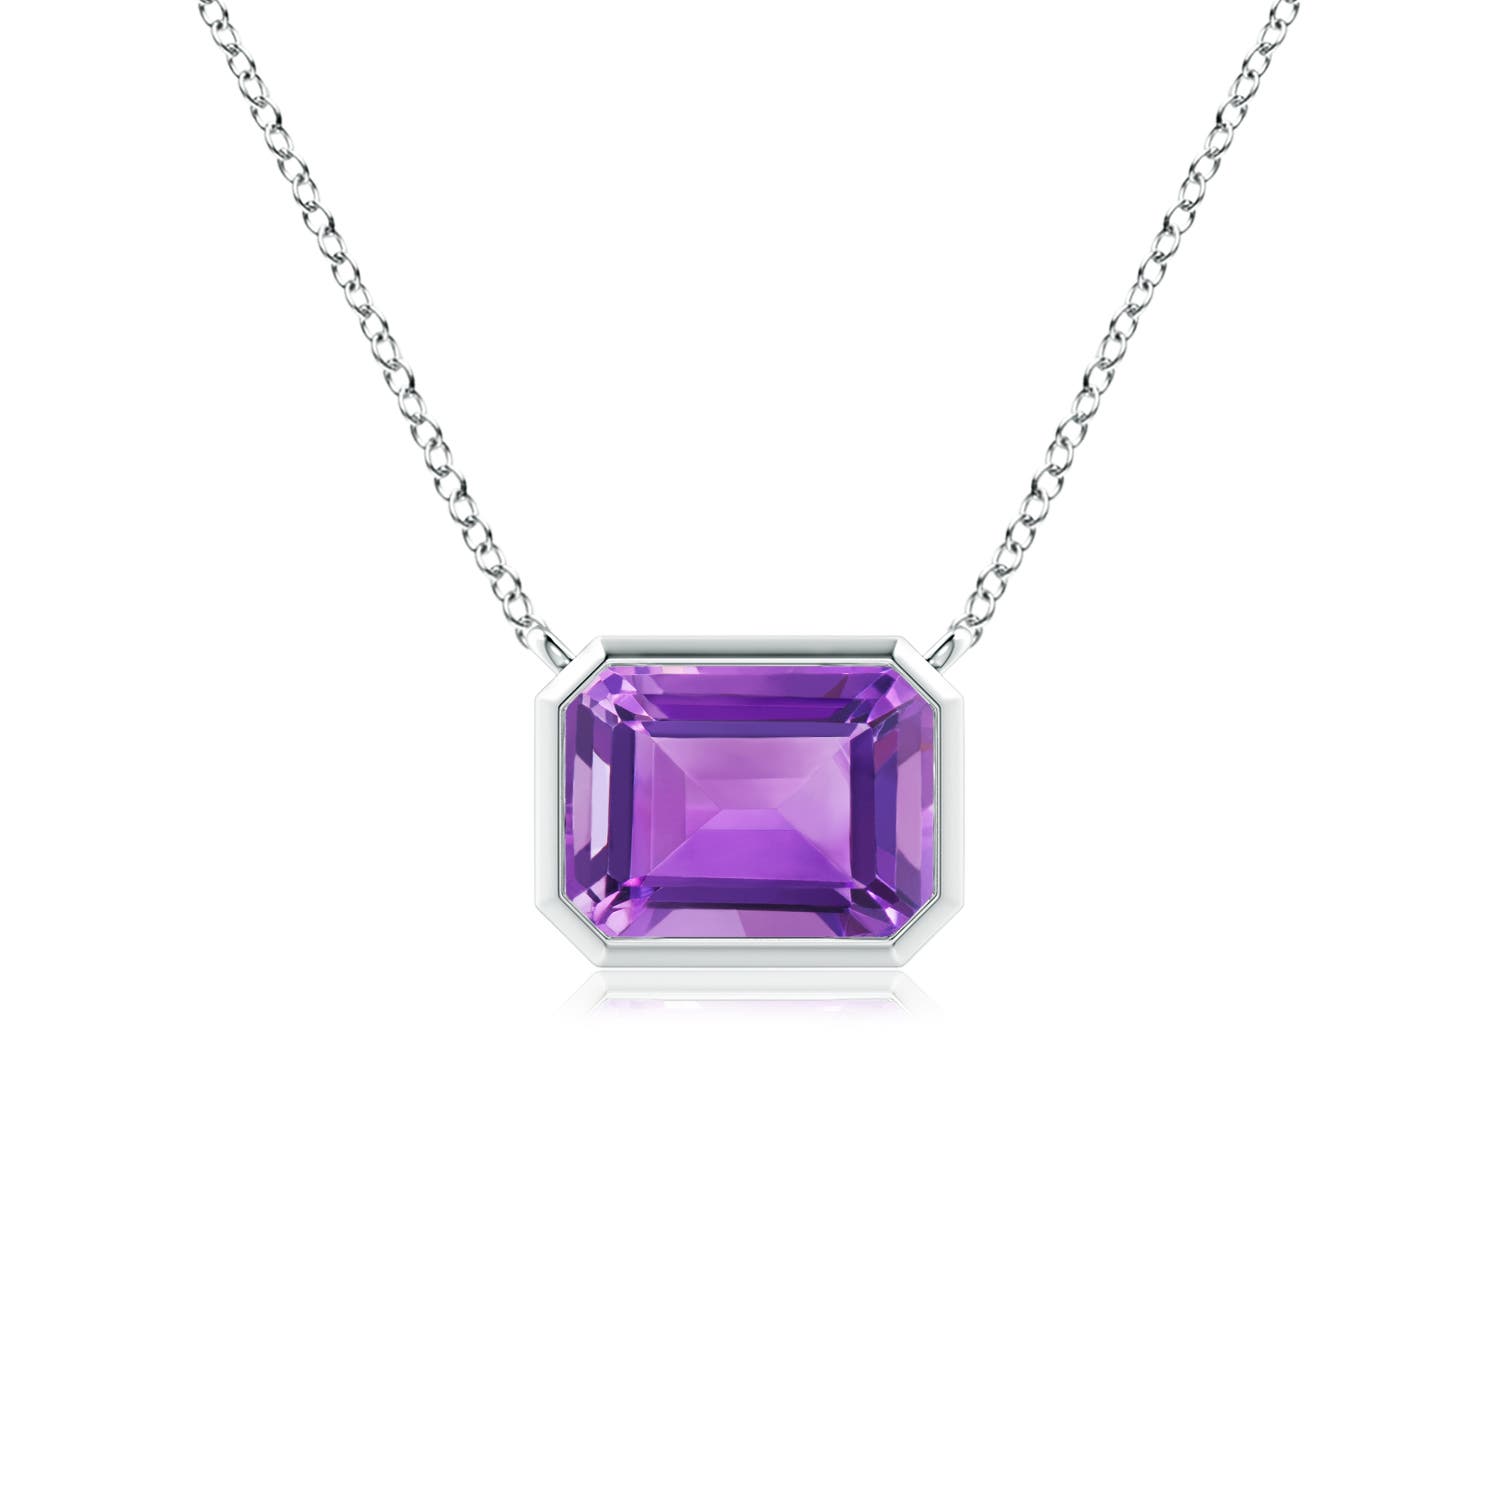 AA - Amethyst / 0.9 CT / 14 KT White Gold